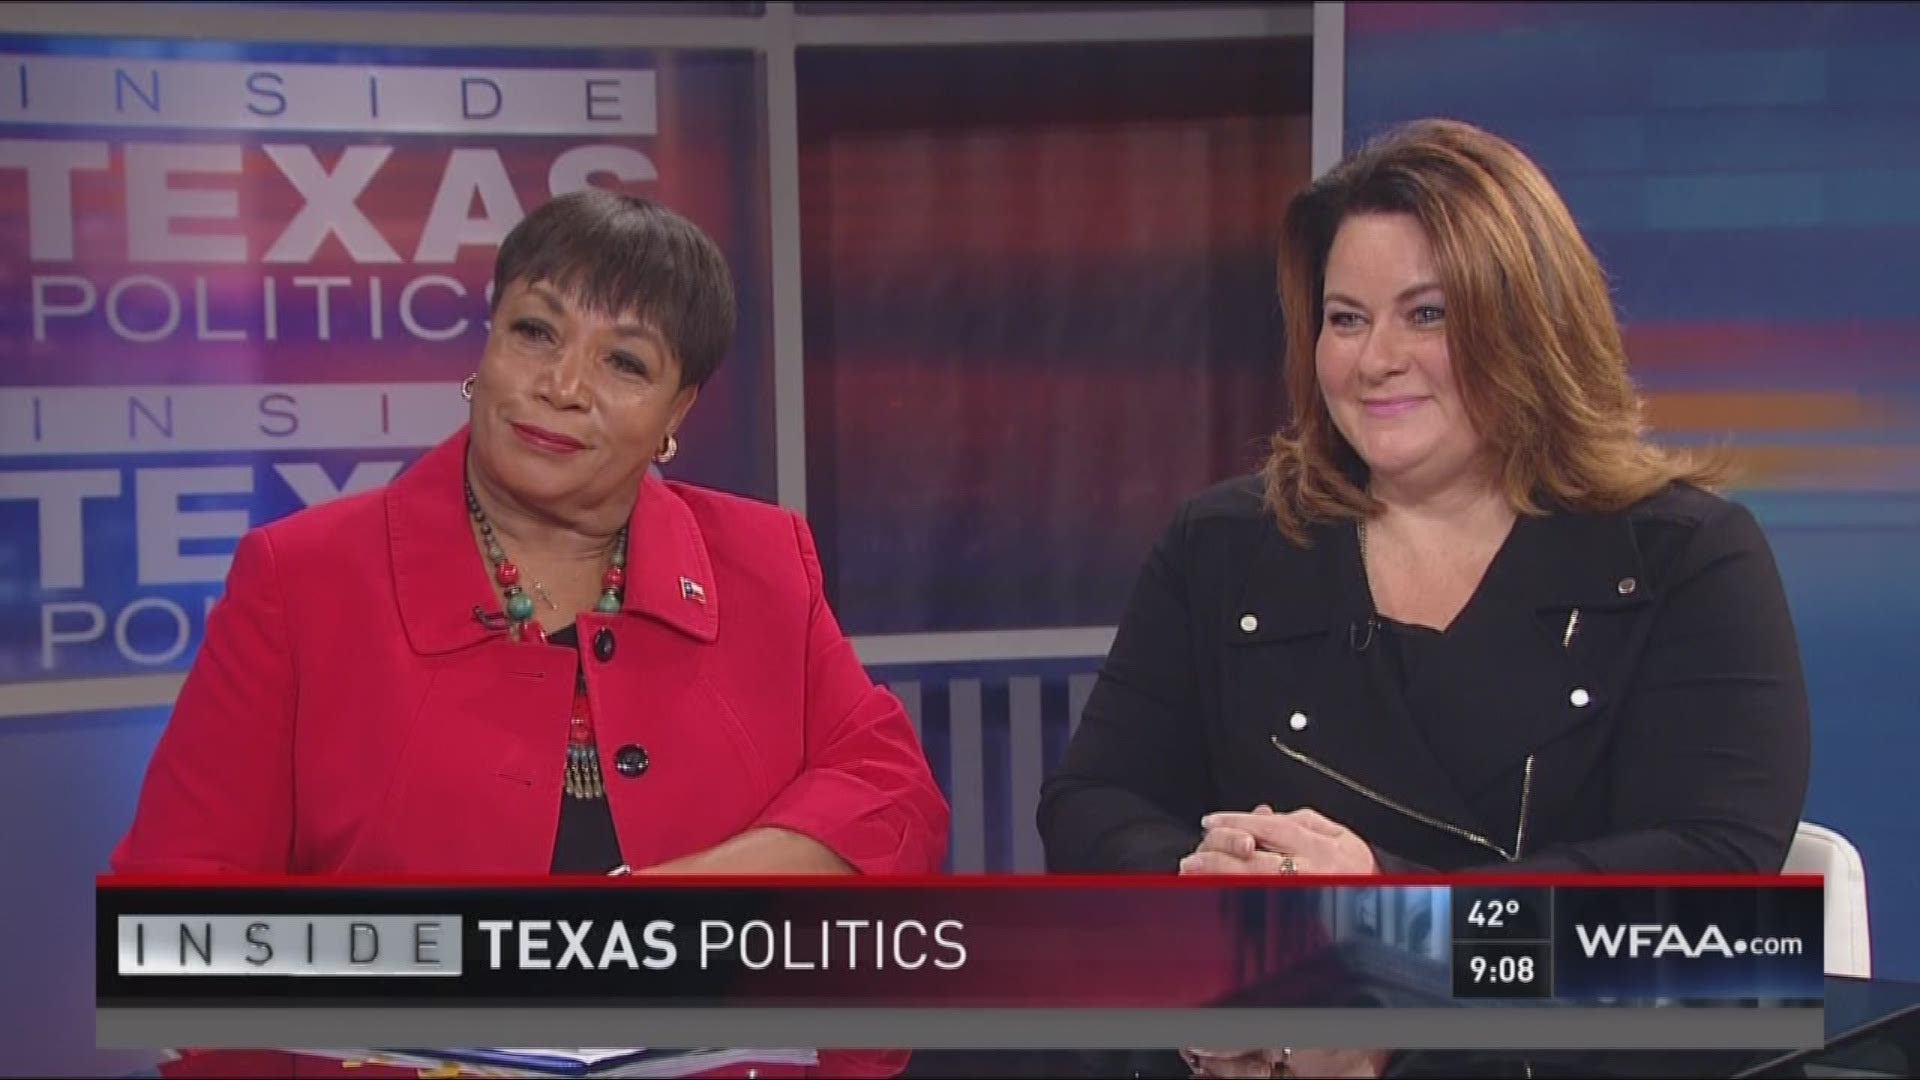 Inside Texas Politics began with a debate between the two Democratic candidates vying to replace Republican Congressman Joe Barton in Congressional District 6.  Jana Lynne Sanchez, a former journalist who also worked in corporate communications, faced off